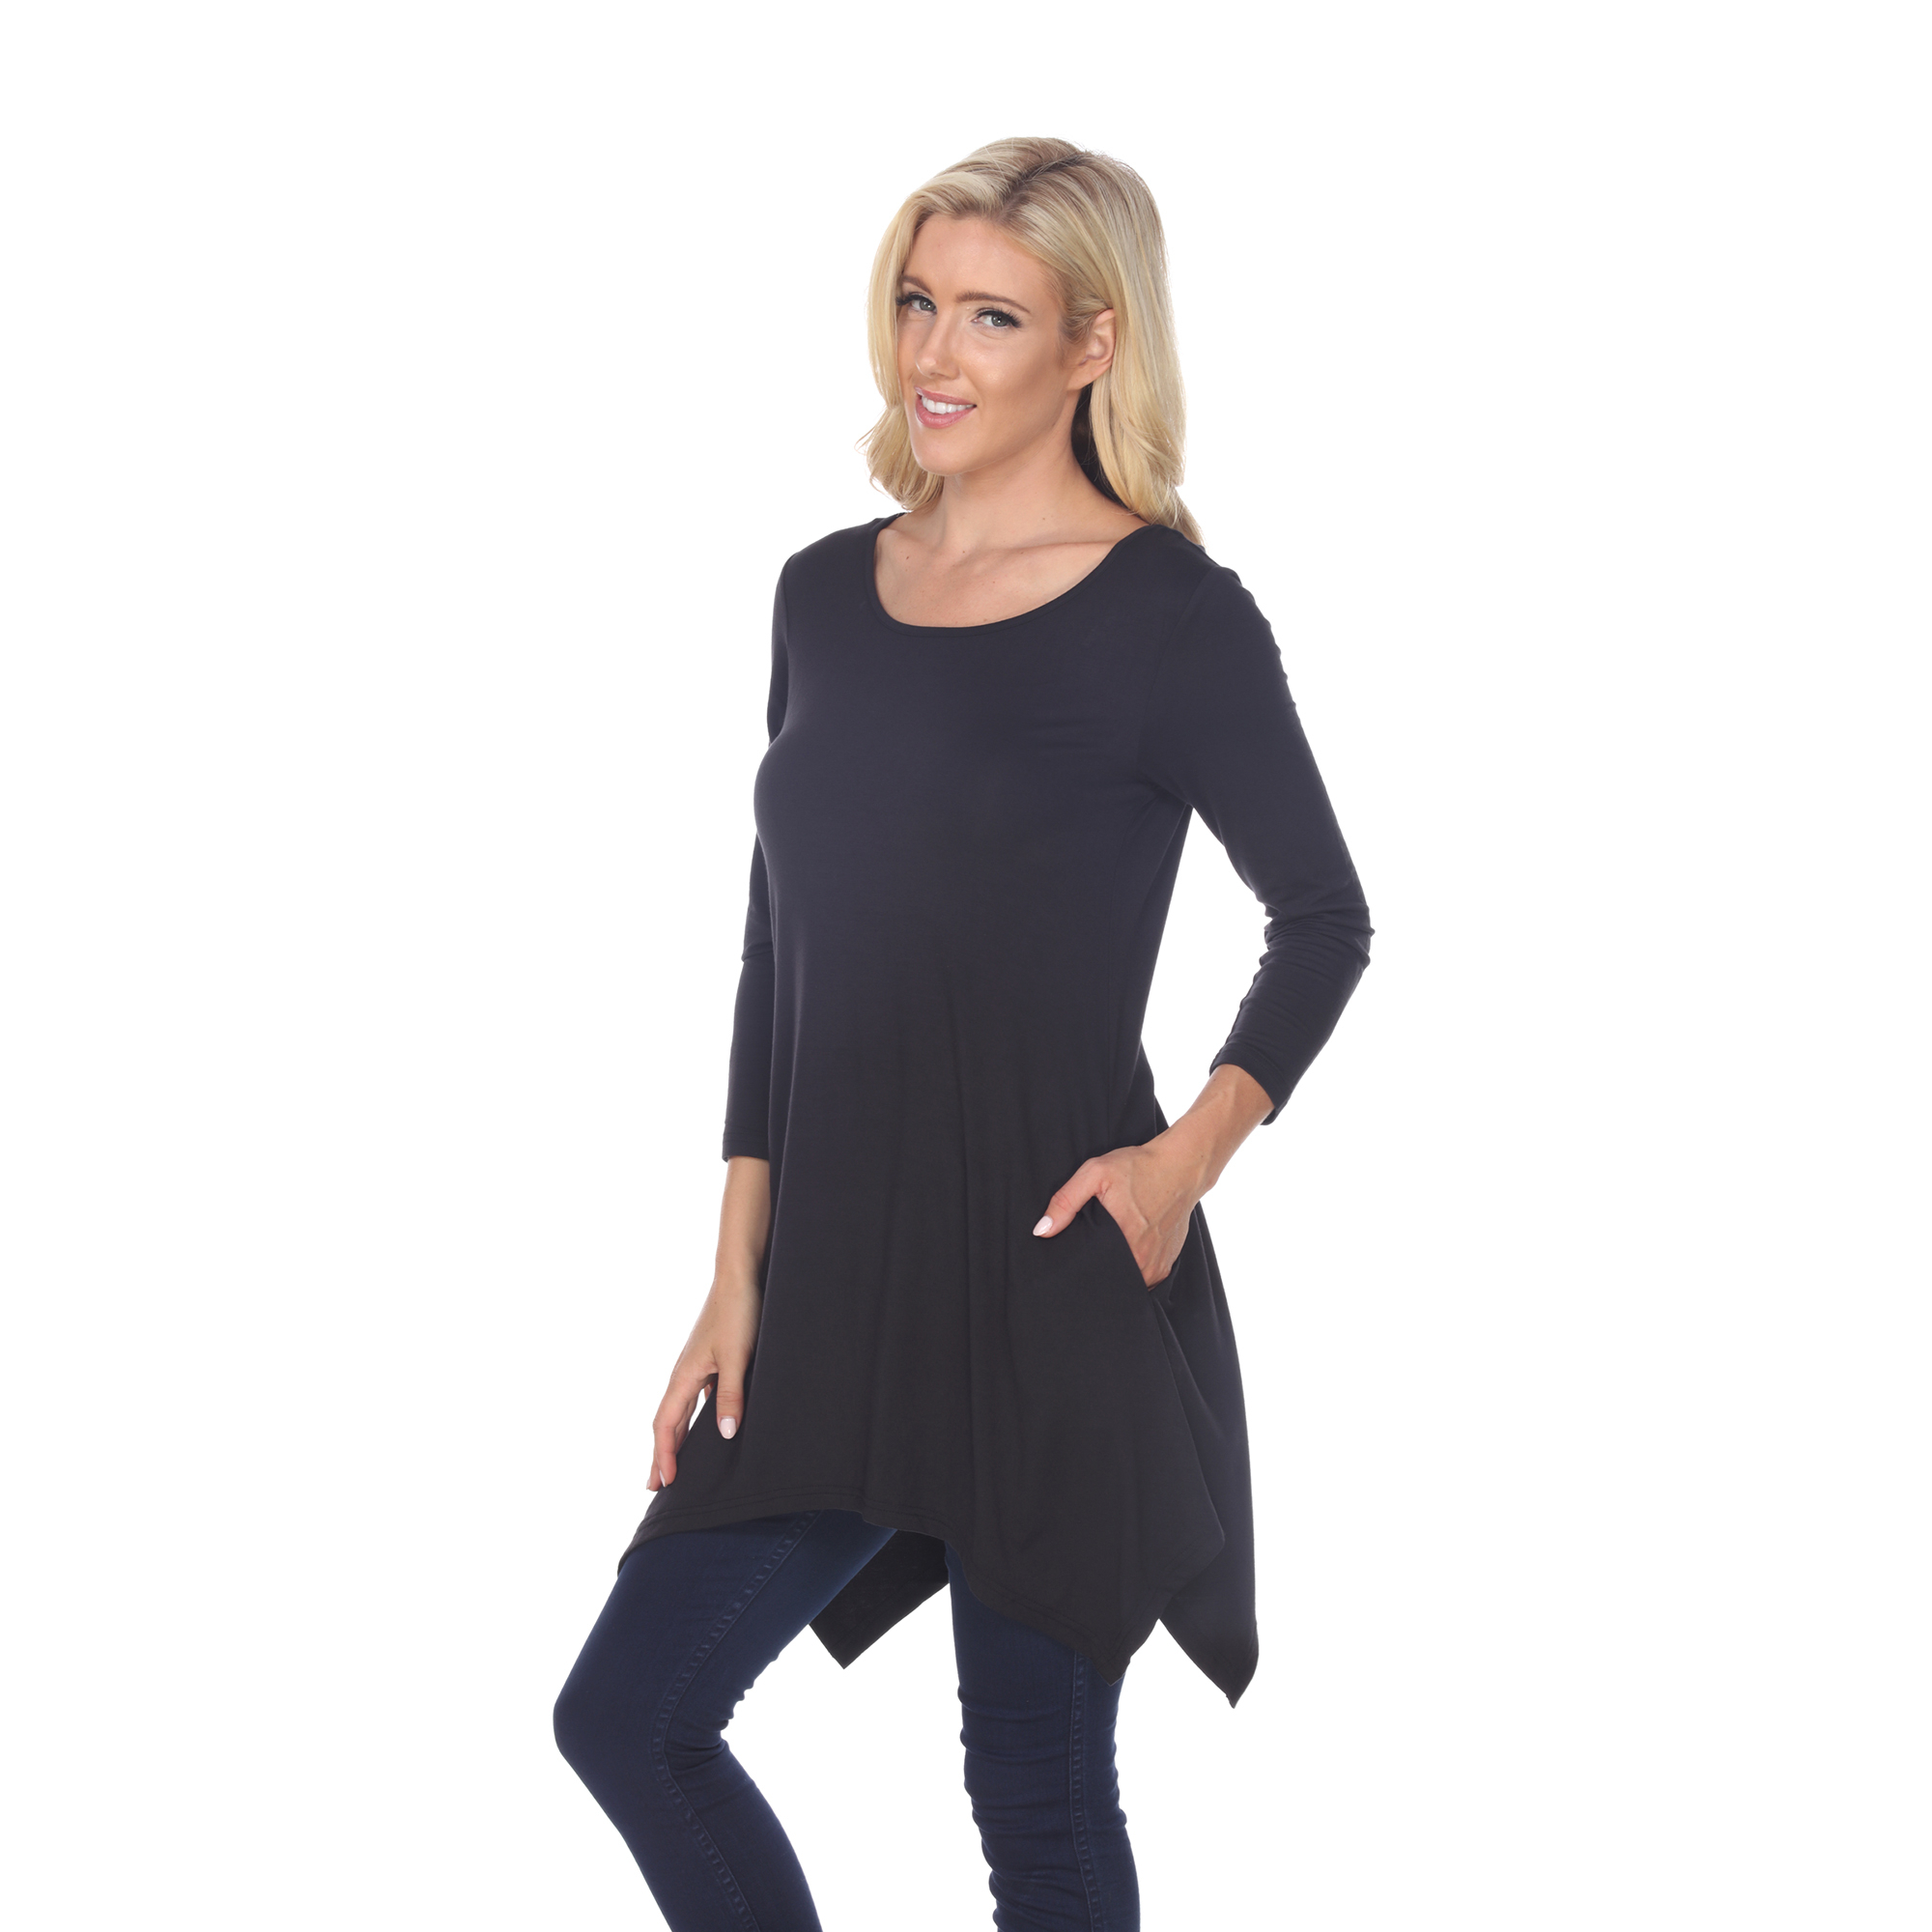 White Mark Women's Quarter Sleeve Tunic Top With Pockets - Black, 5X